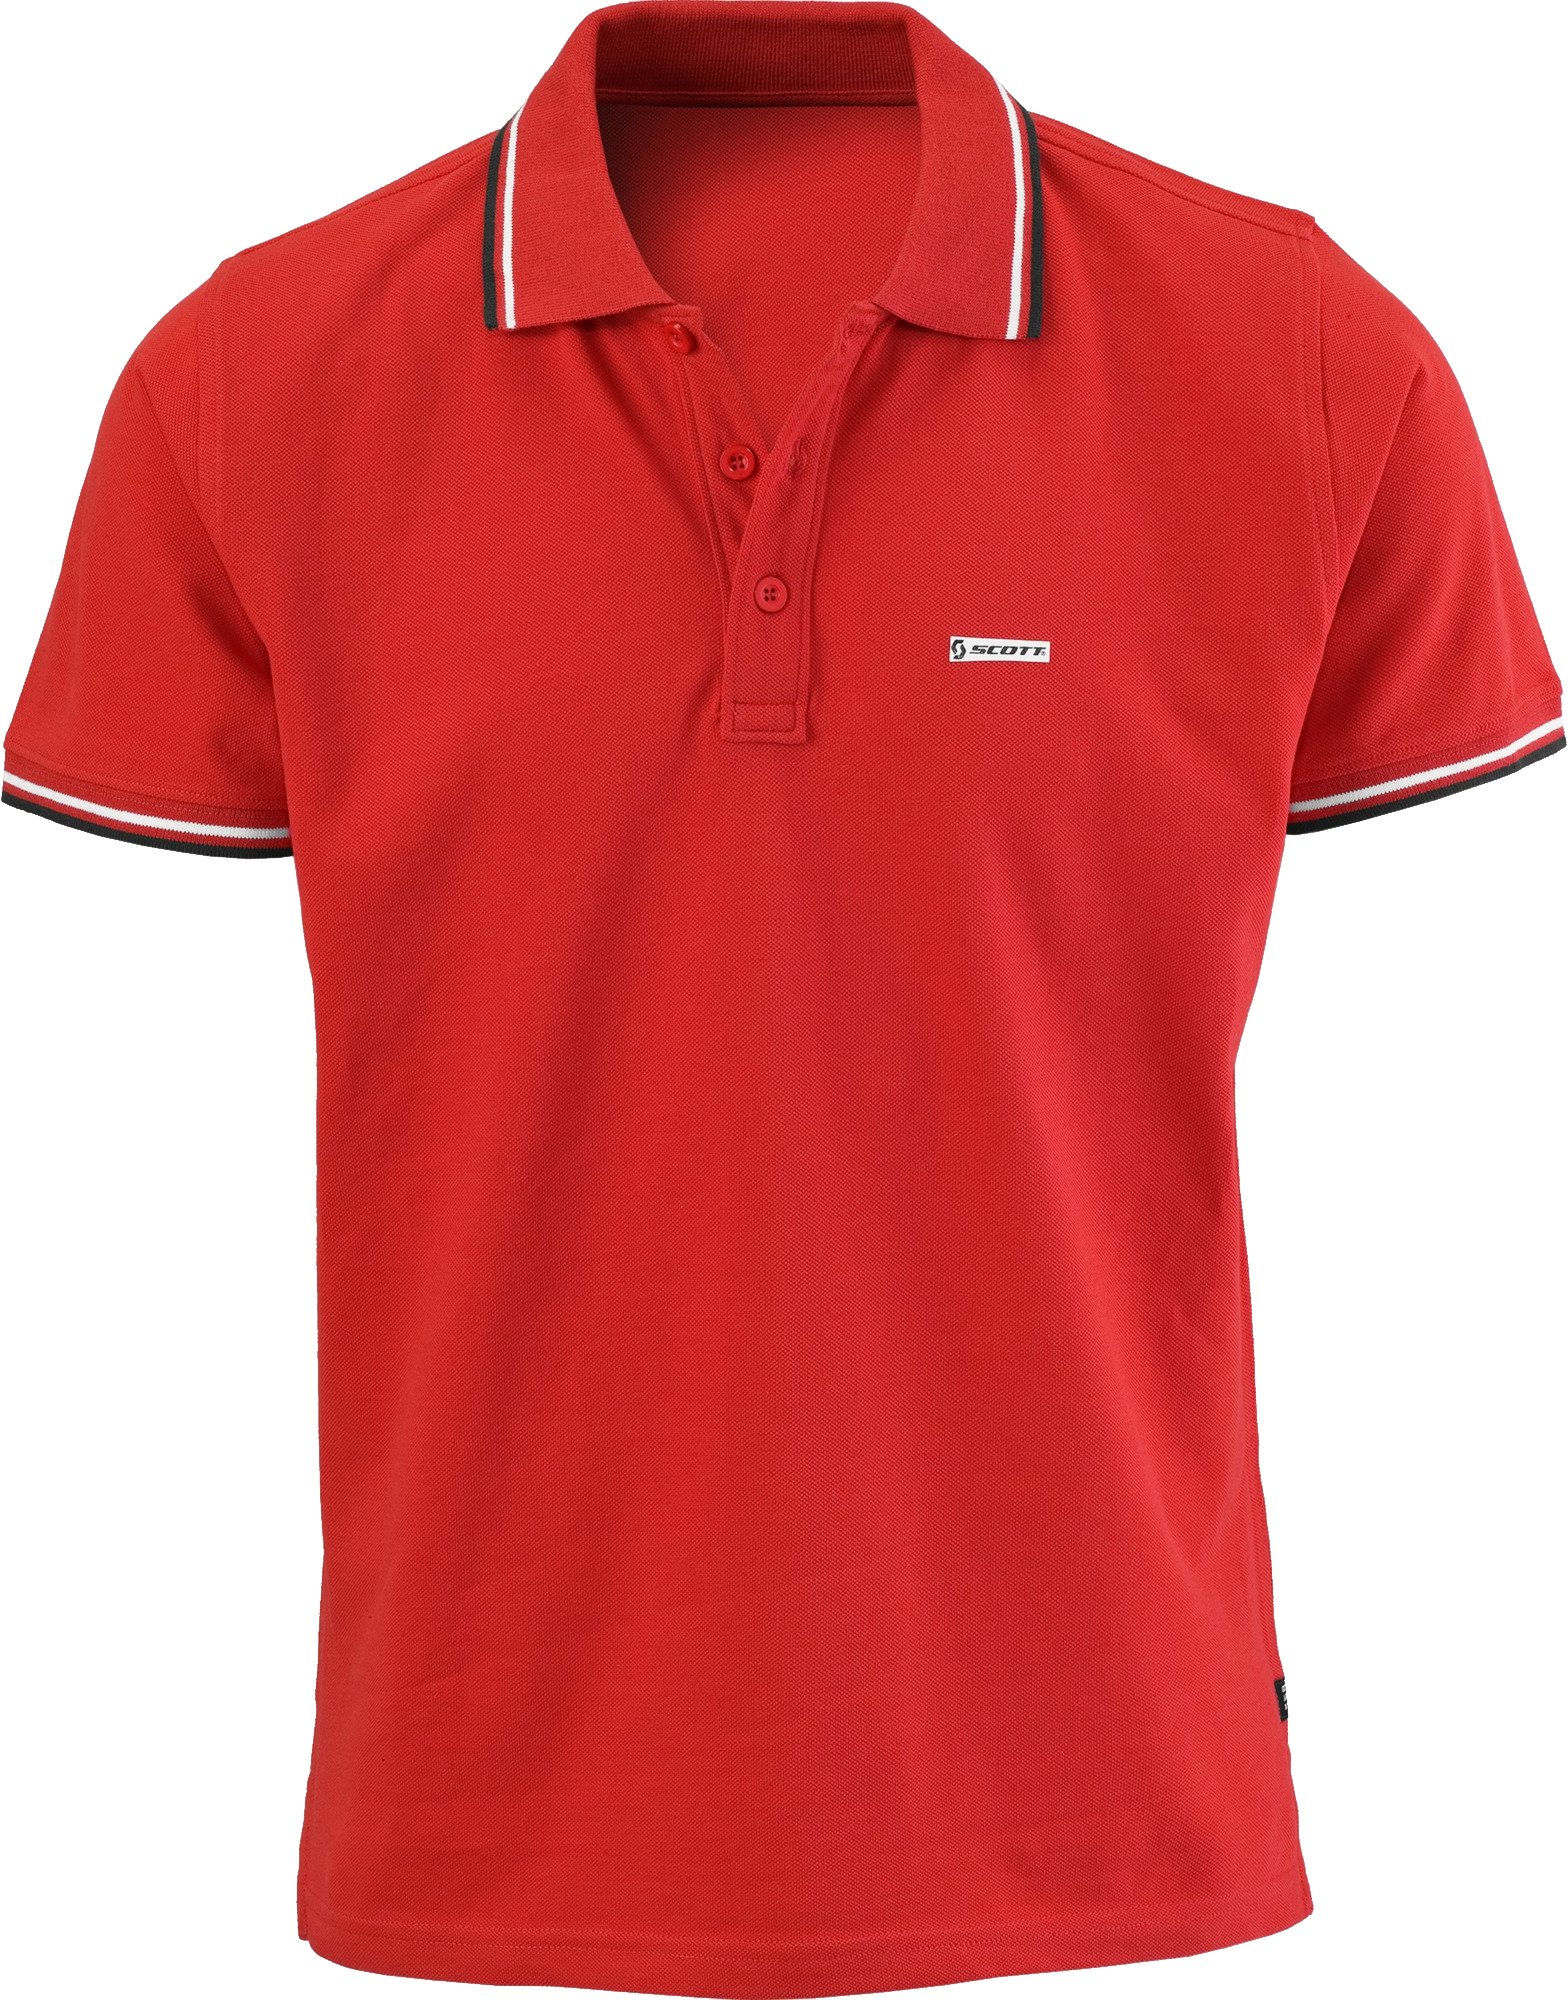 Red Men\'s Polo Shirt PNG Image.